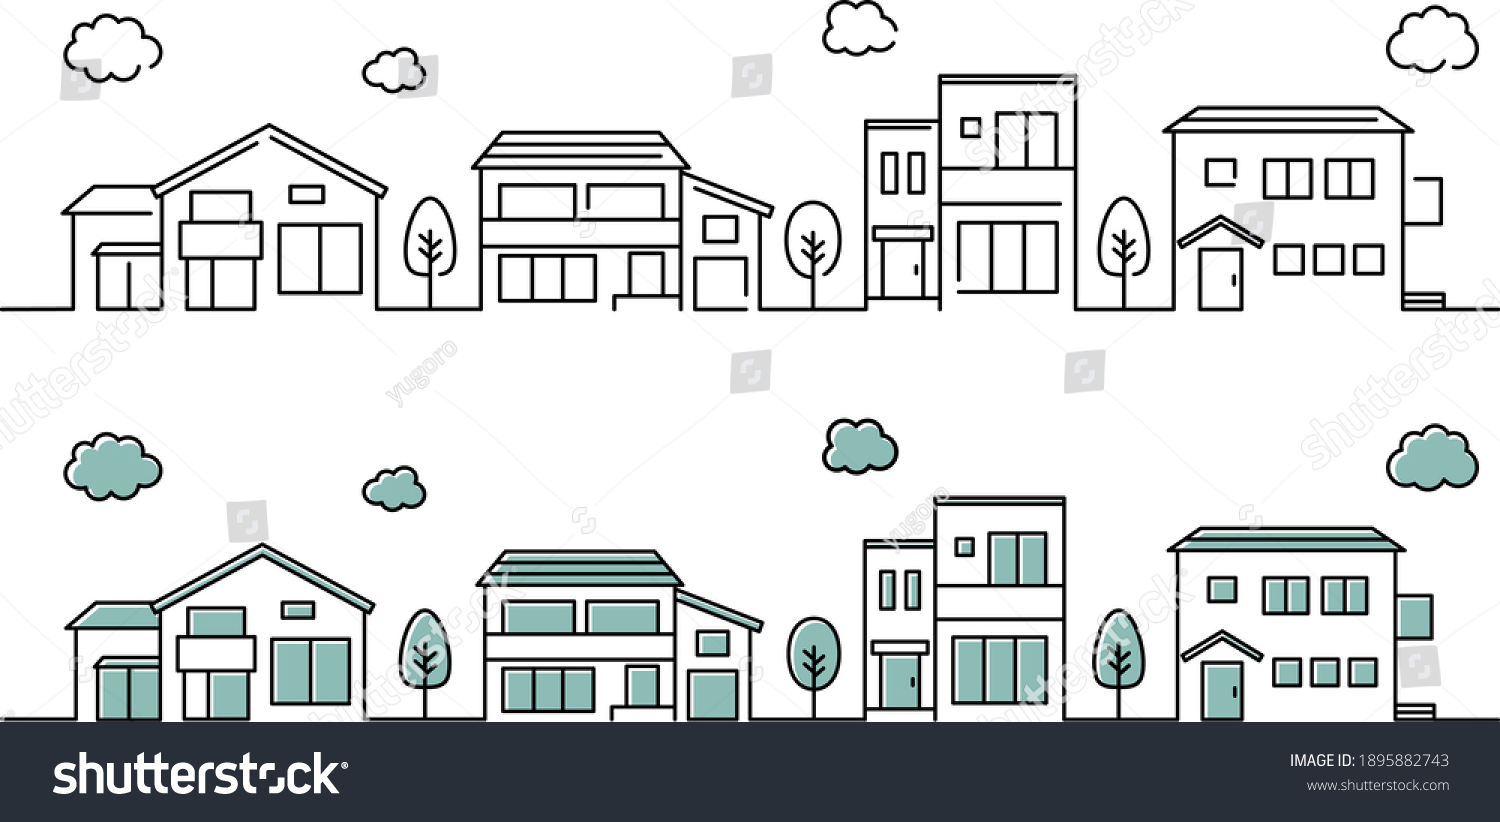 SVG of A set of illustrations of a simple house icon cityscape svg